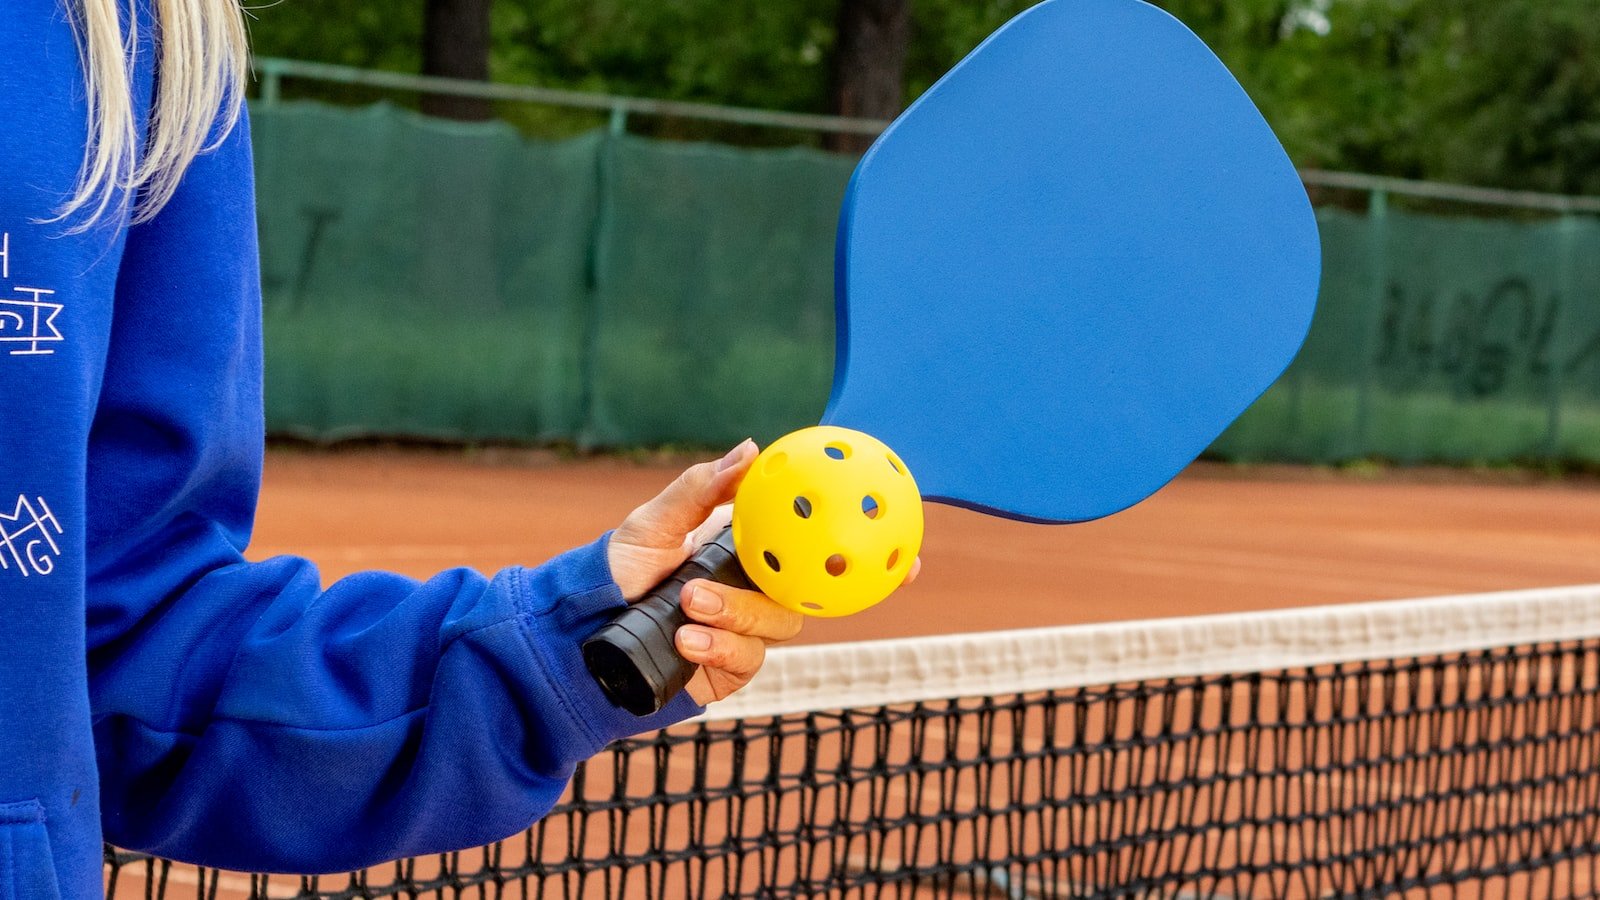 The Influence of Celebrity Players on Pickleball Culture